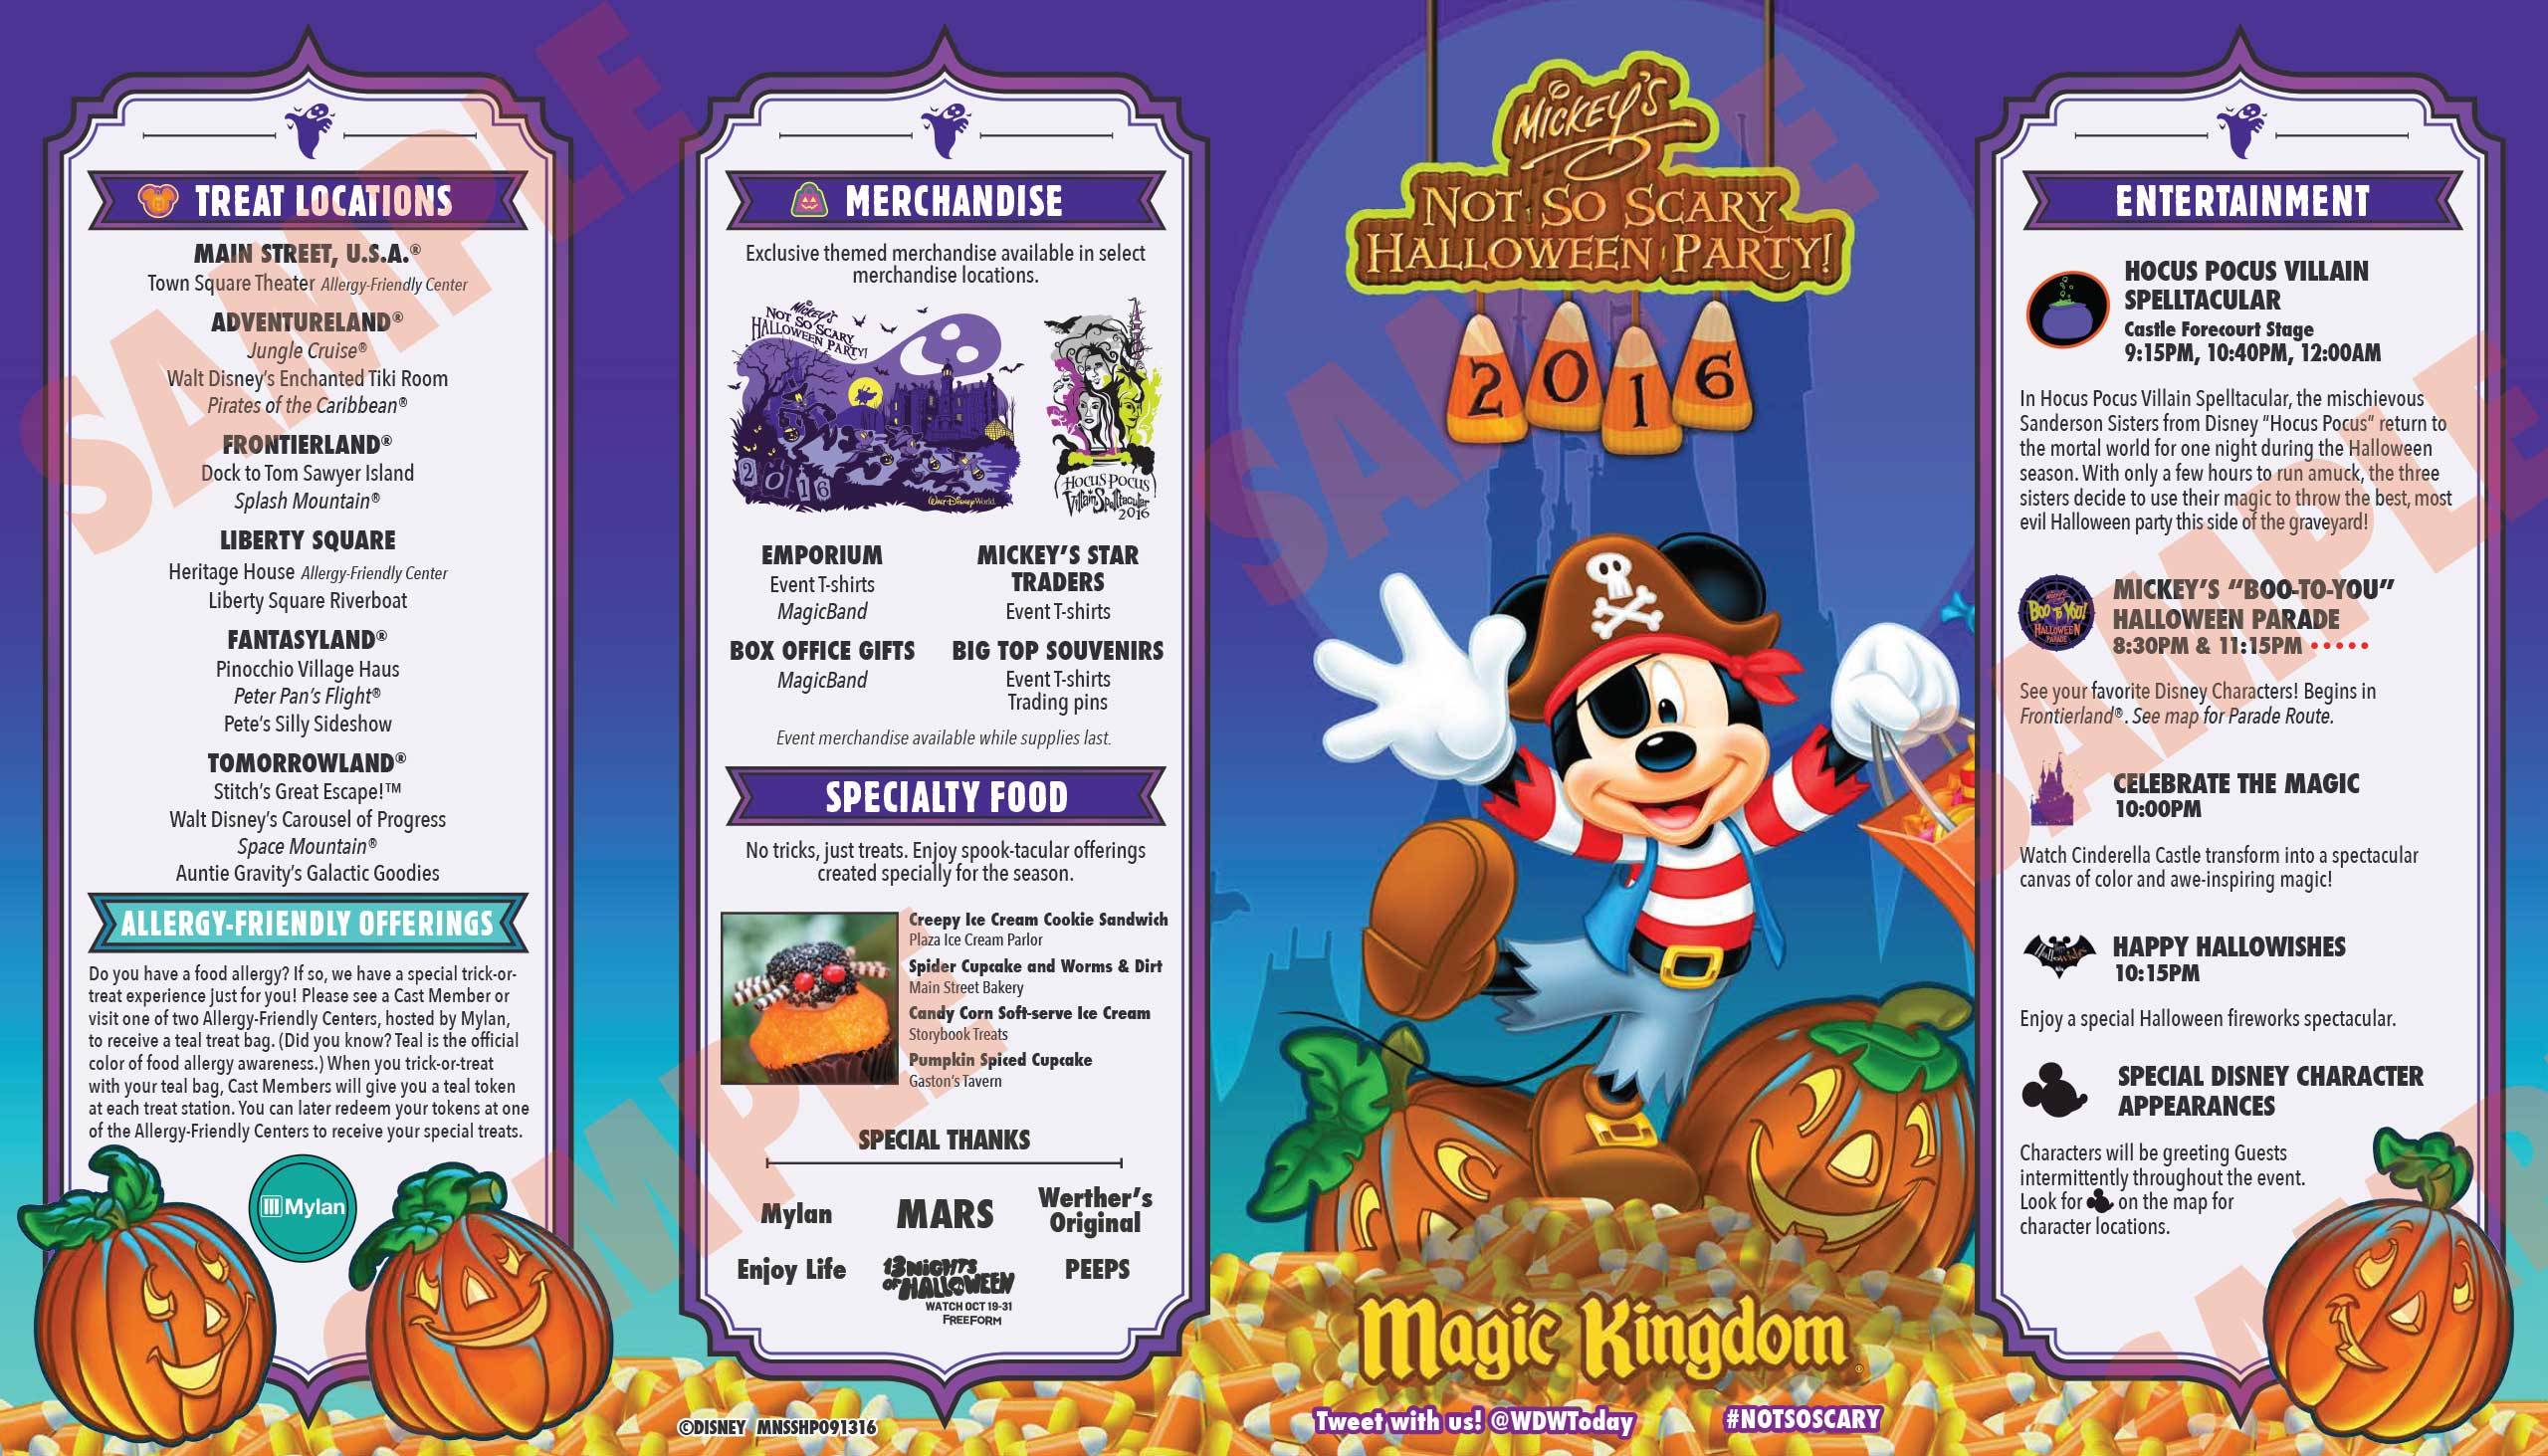 Mickey's Not-So-Scary Halloween Party guide map 2016 - Front